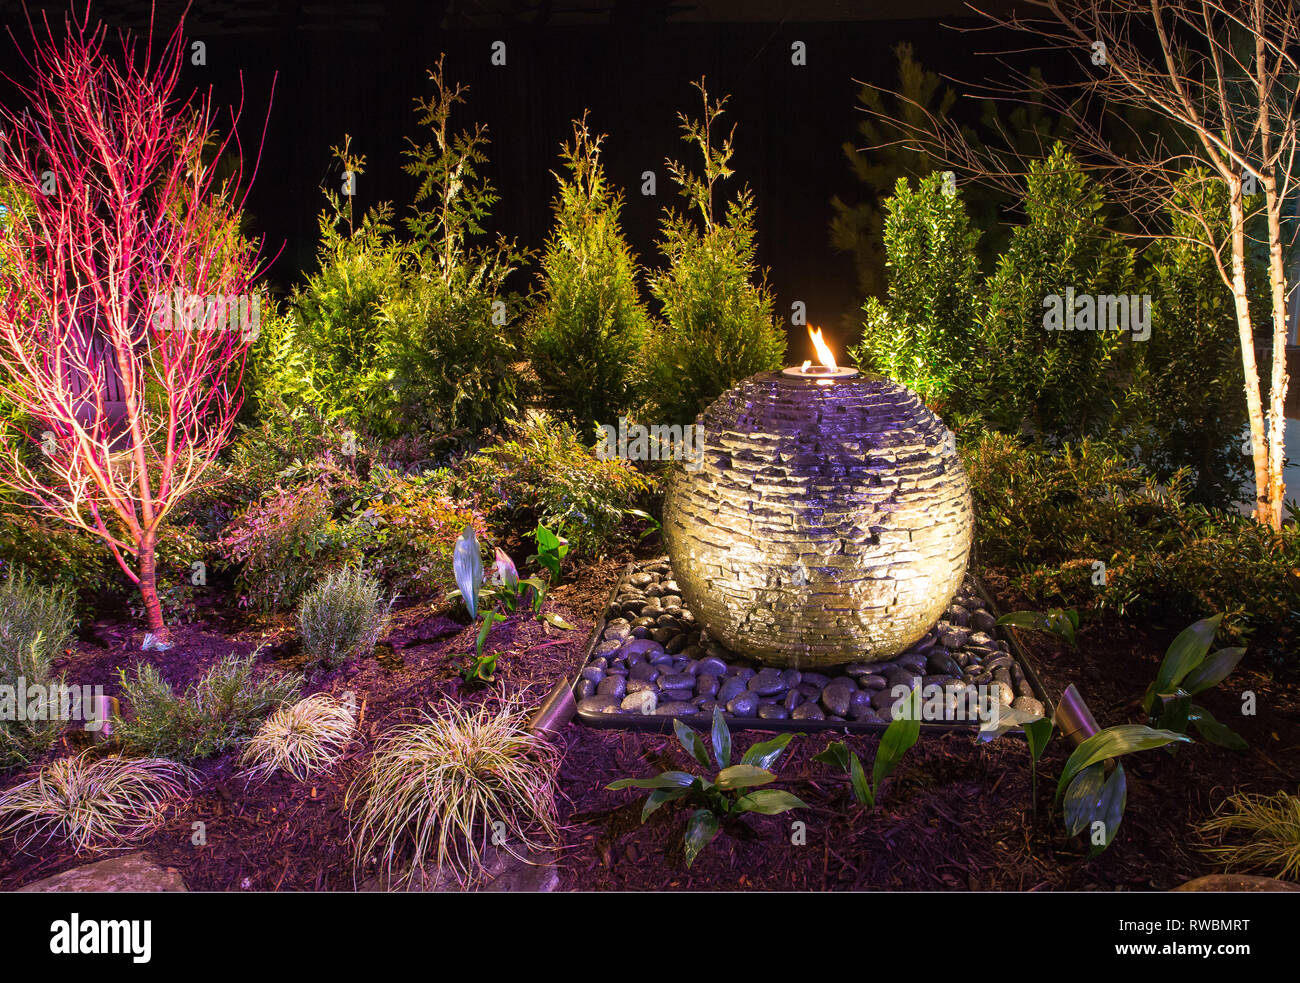 Dramatically lit landscape design with circular stone water fountain. Stock Photo